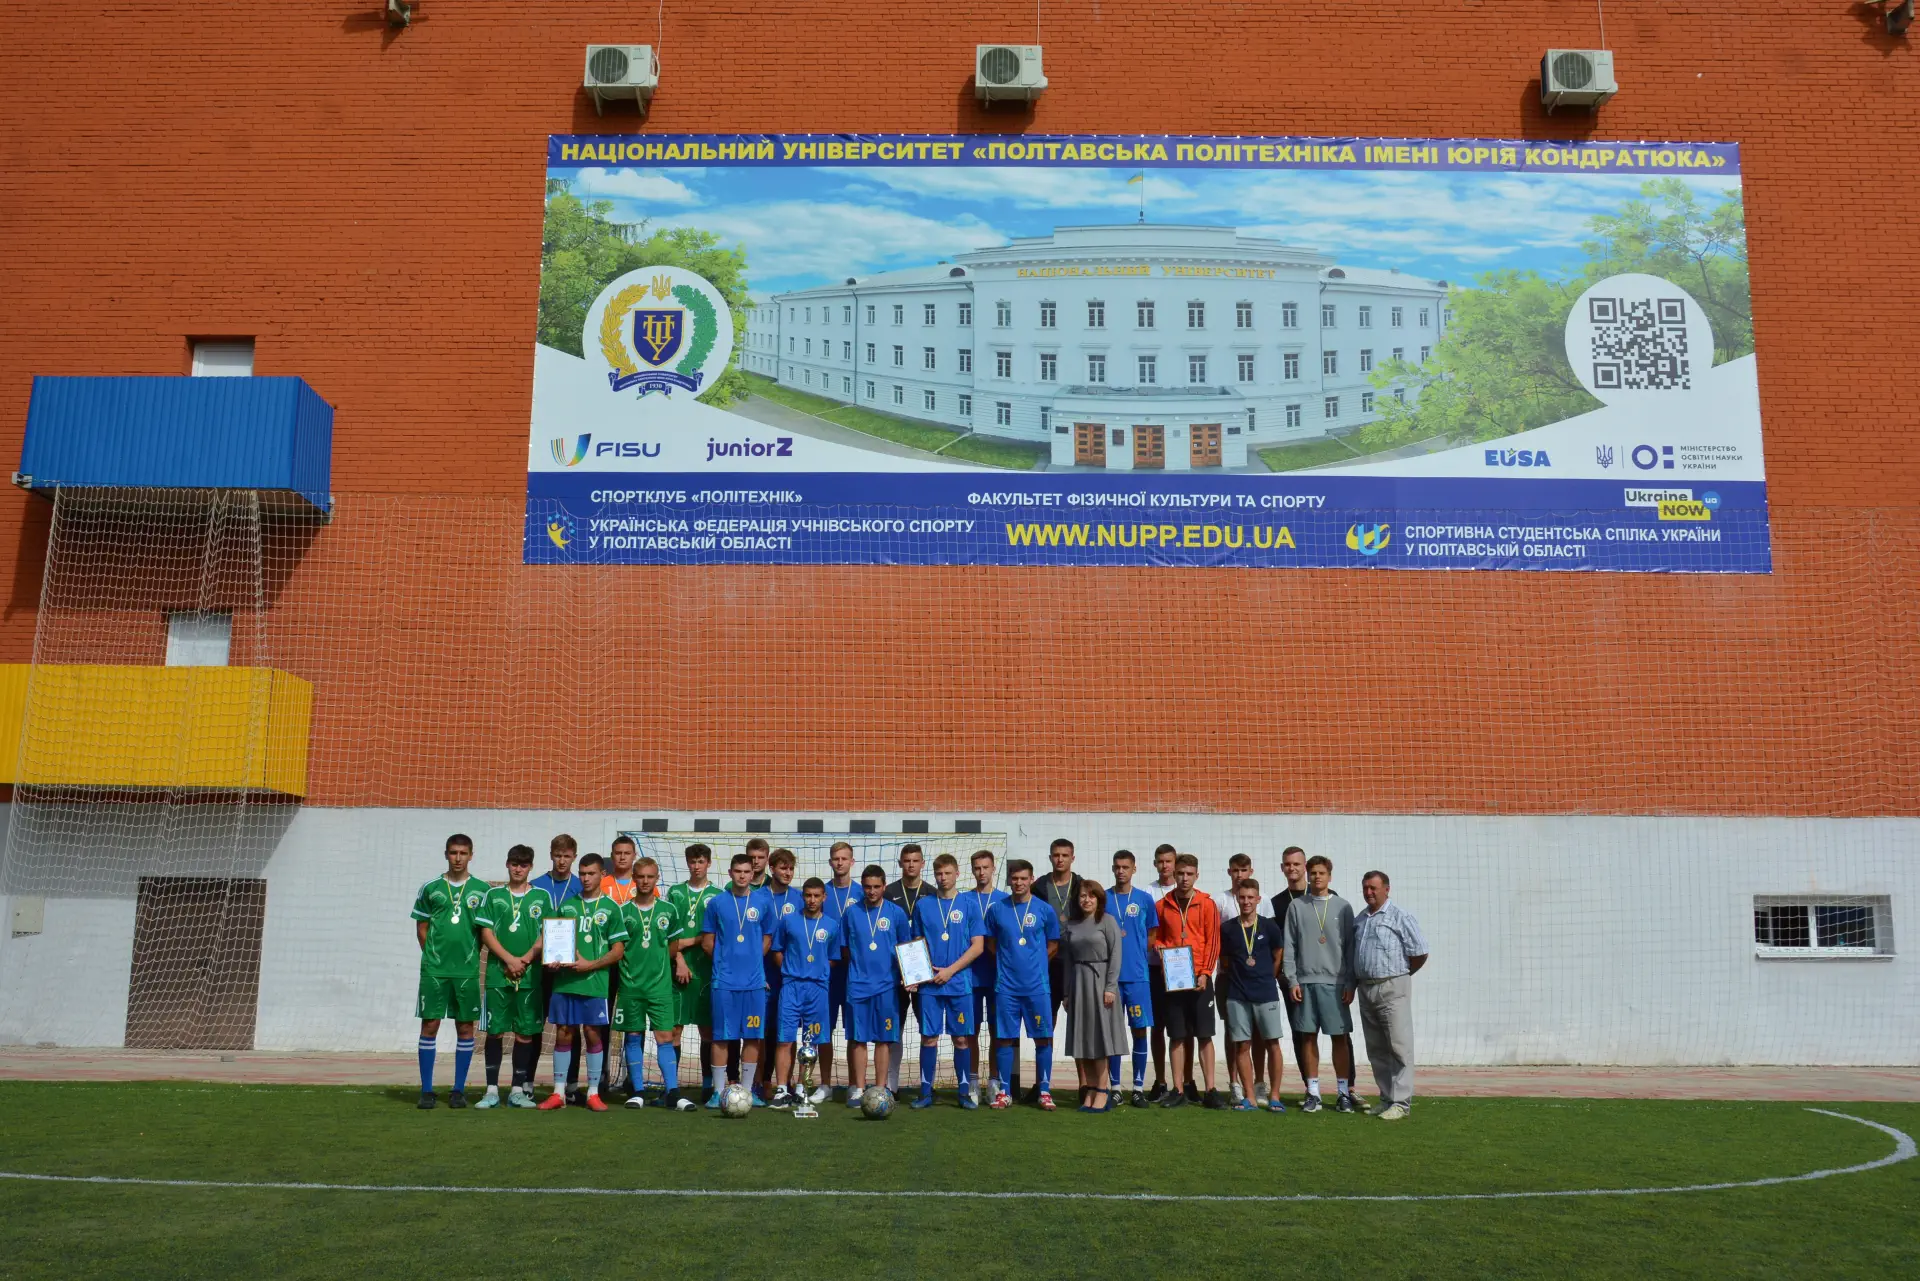 Mini-football tournament in memory of rector Oleksandr Onyshchenko is held at the Polytechnic